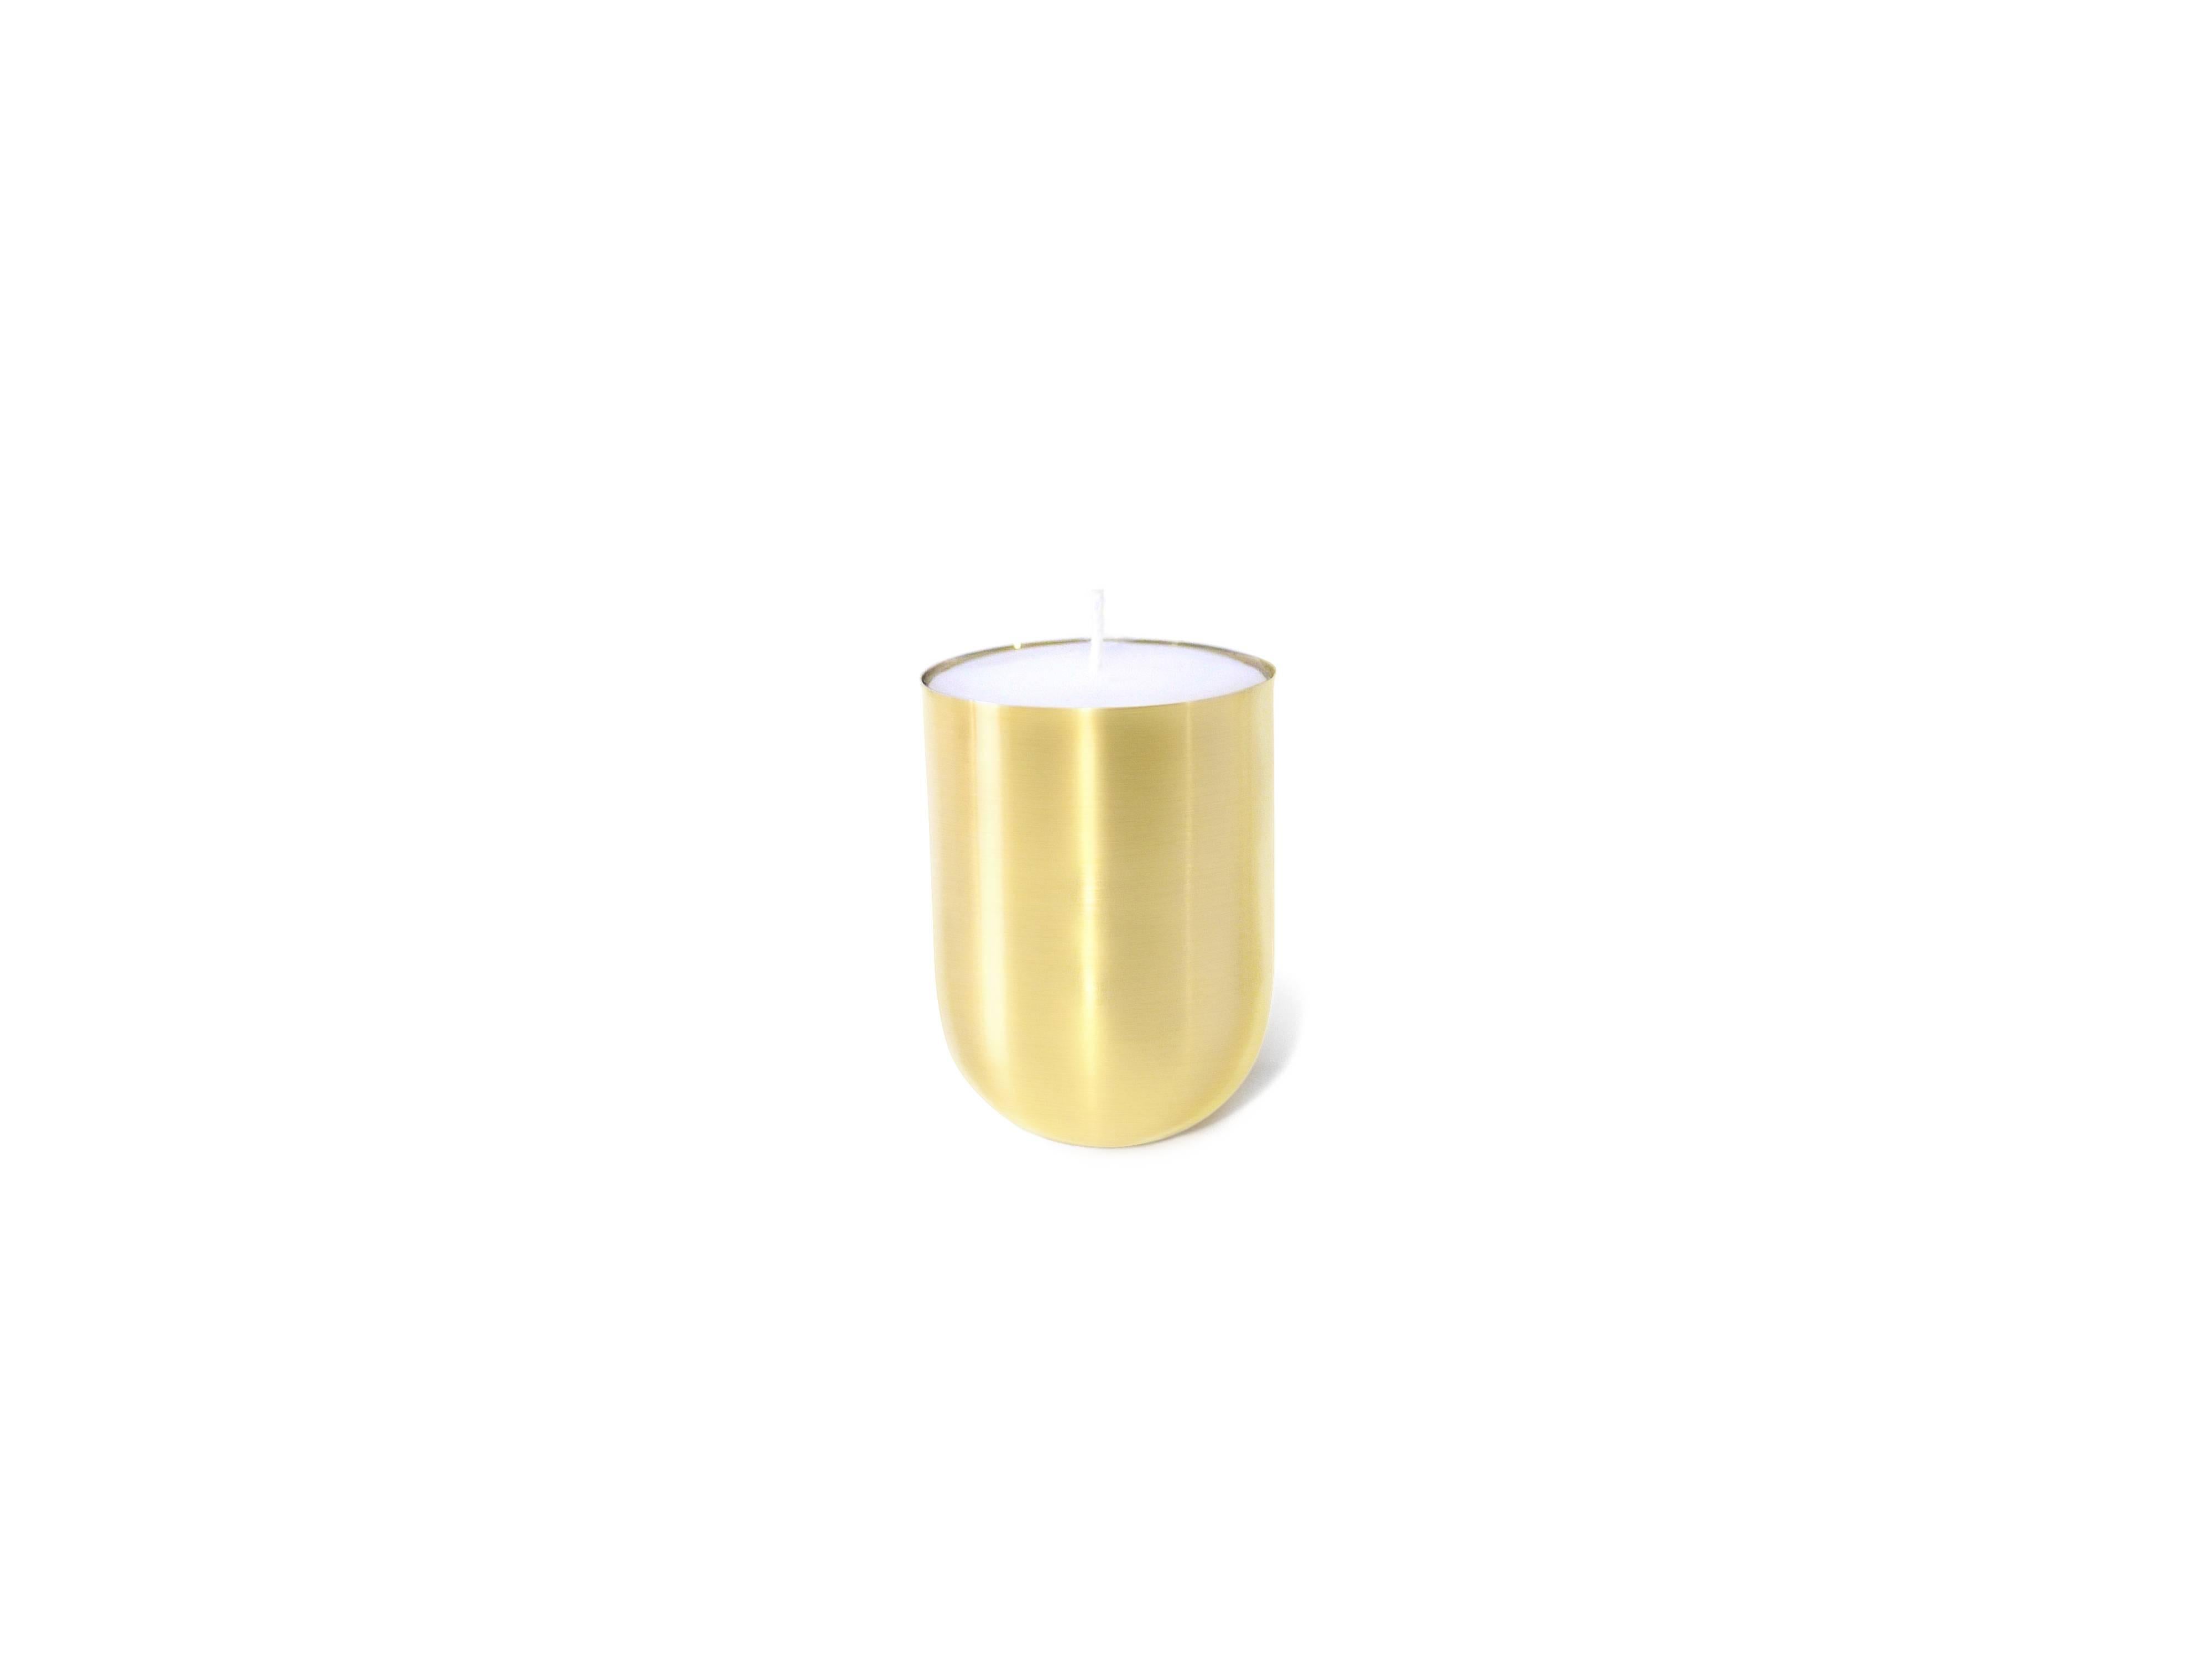 Part of Les Few's Armance collection, this contemporary, round, handspun Swedish brass, modern, Minimalist candle is made by artisans in Sweden. The candle wax comes in either white or black. The brass is Swedish brass that is handspun to the shape